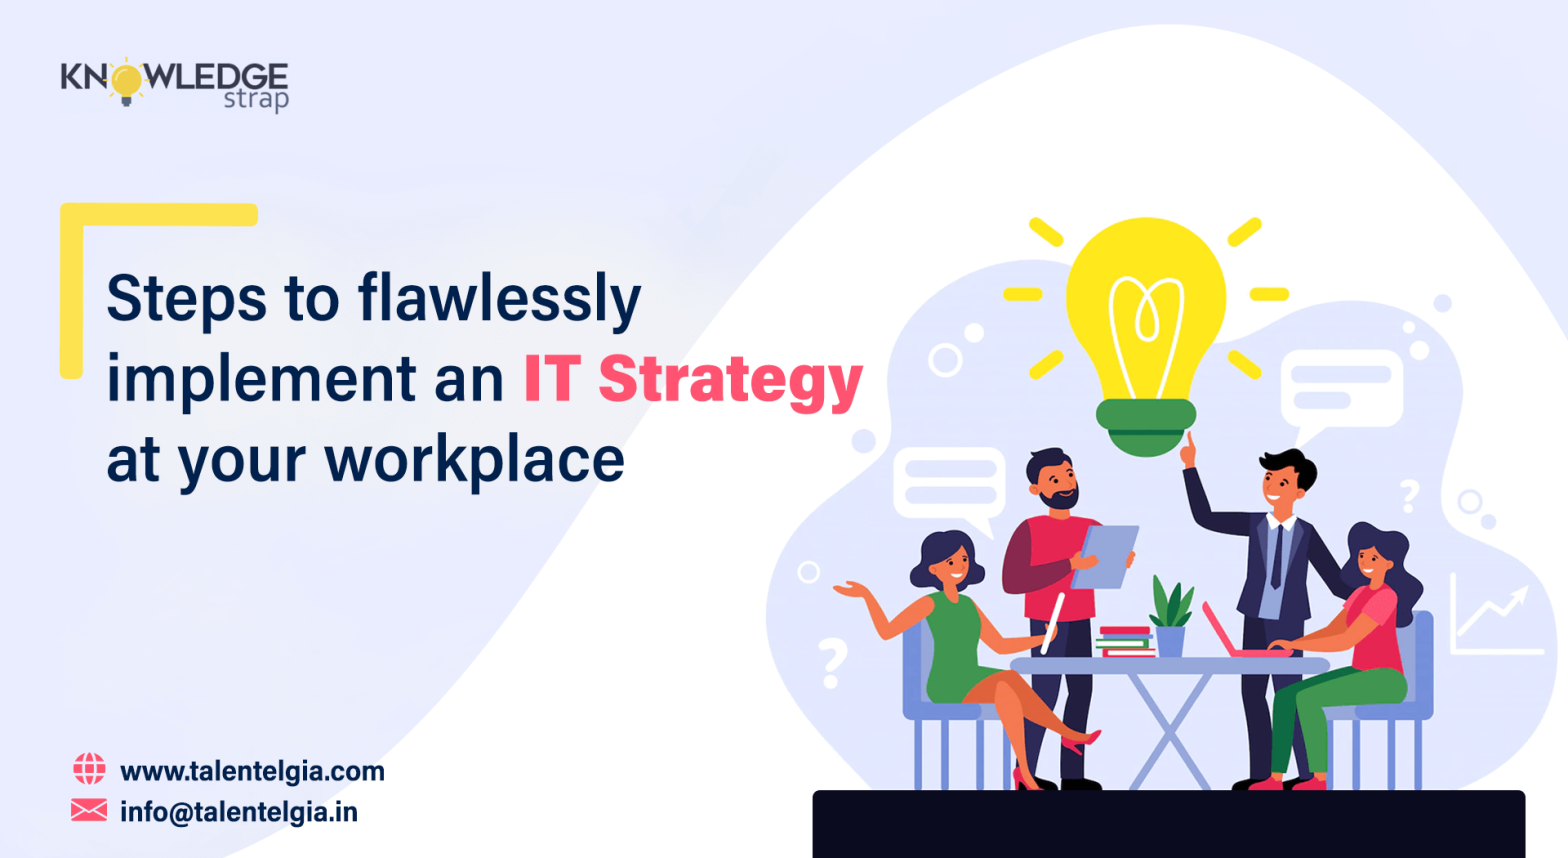 How to flawlessly implement an IT strategy at your workplace